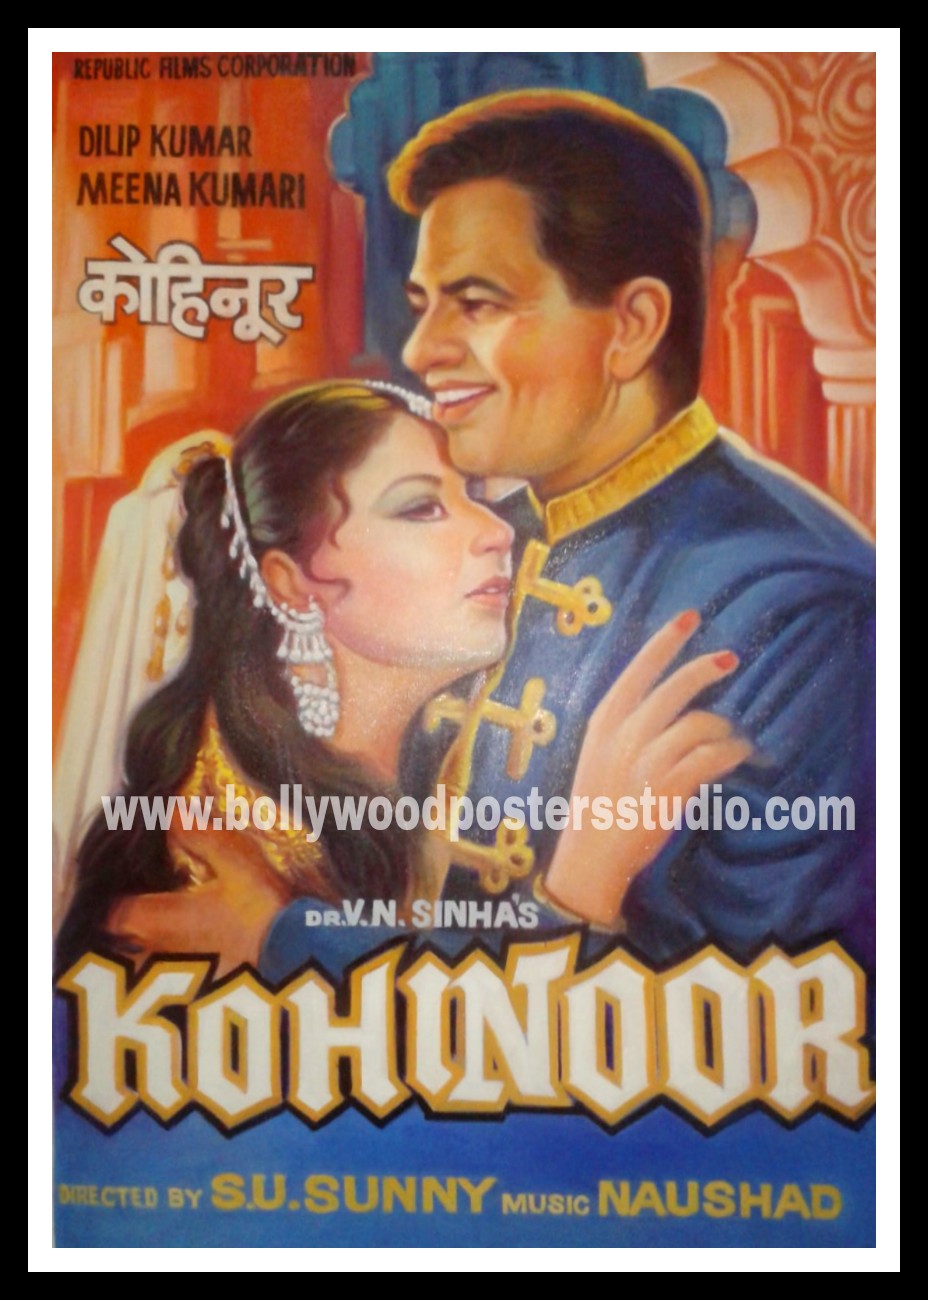 Custom made old classic hindi movie posters